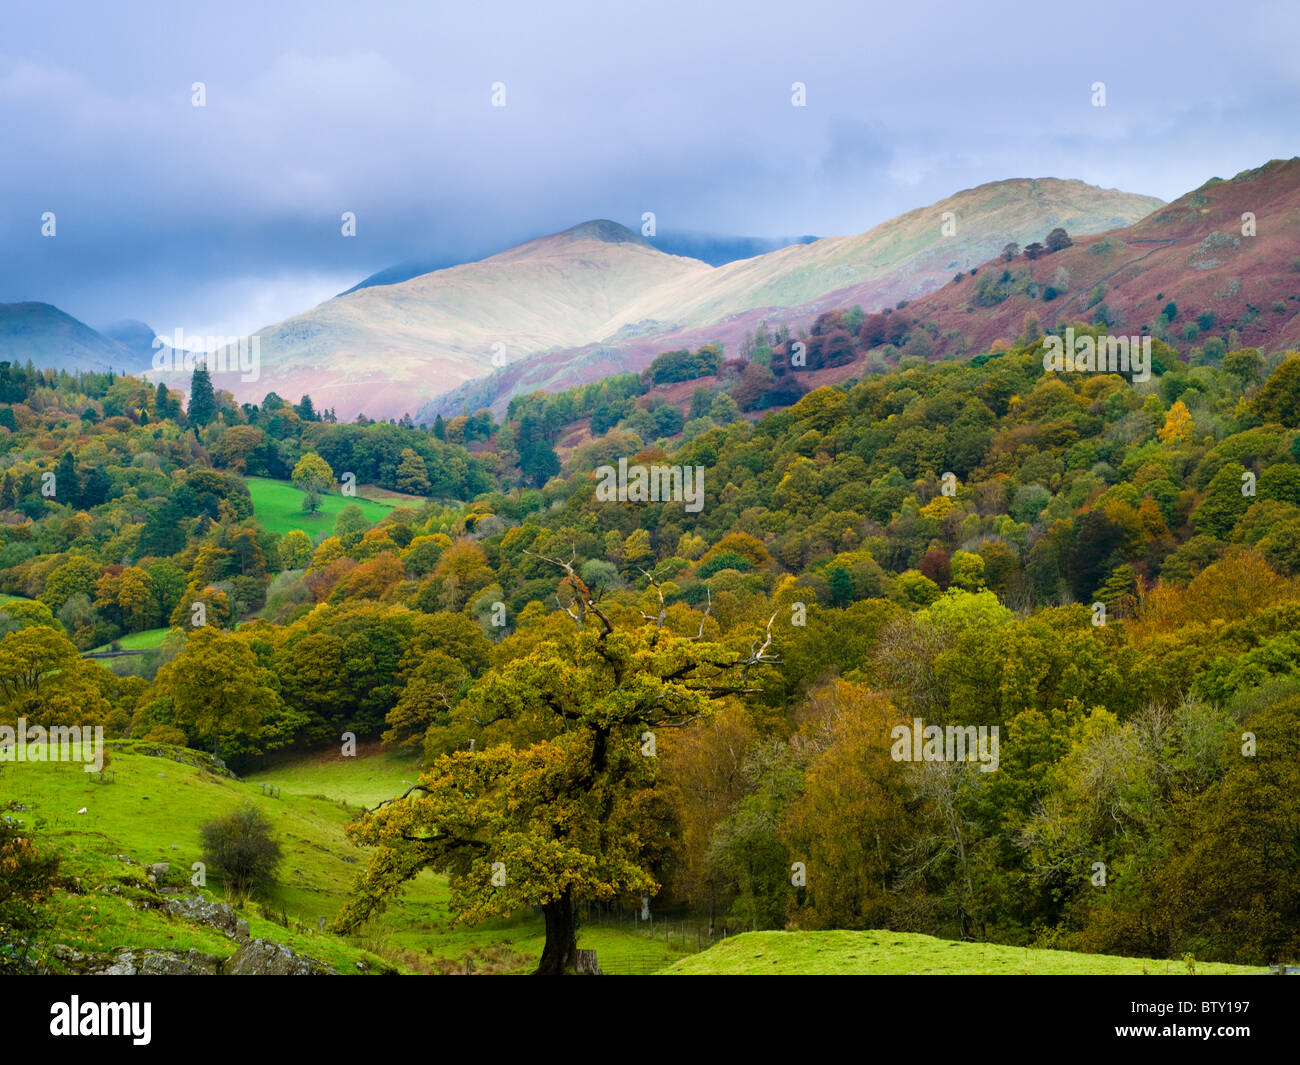 Great Rigg and Heron Pike viewed over the Brathay Valley in the Lake District National Park near Skelwith Bridge, Cumbria, England. Stock Photo